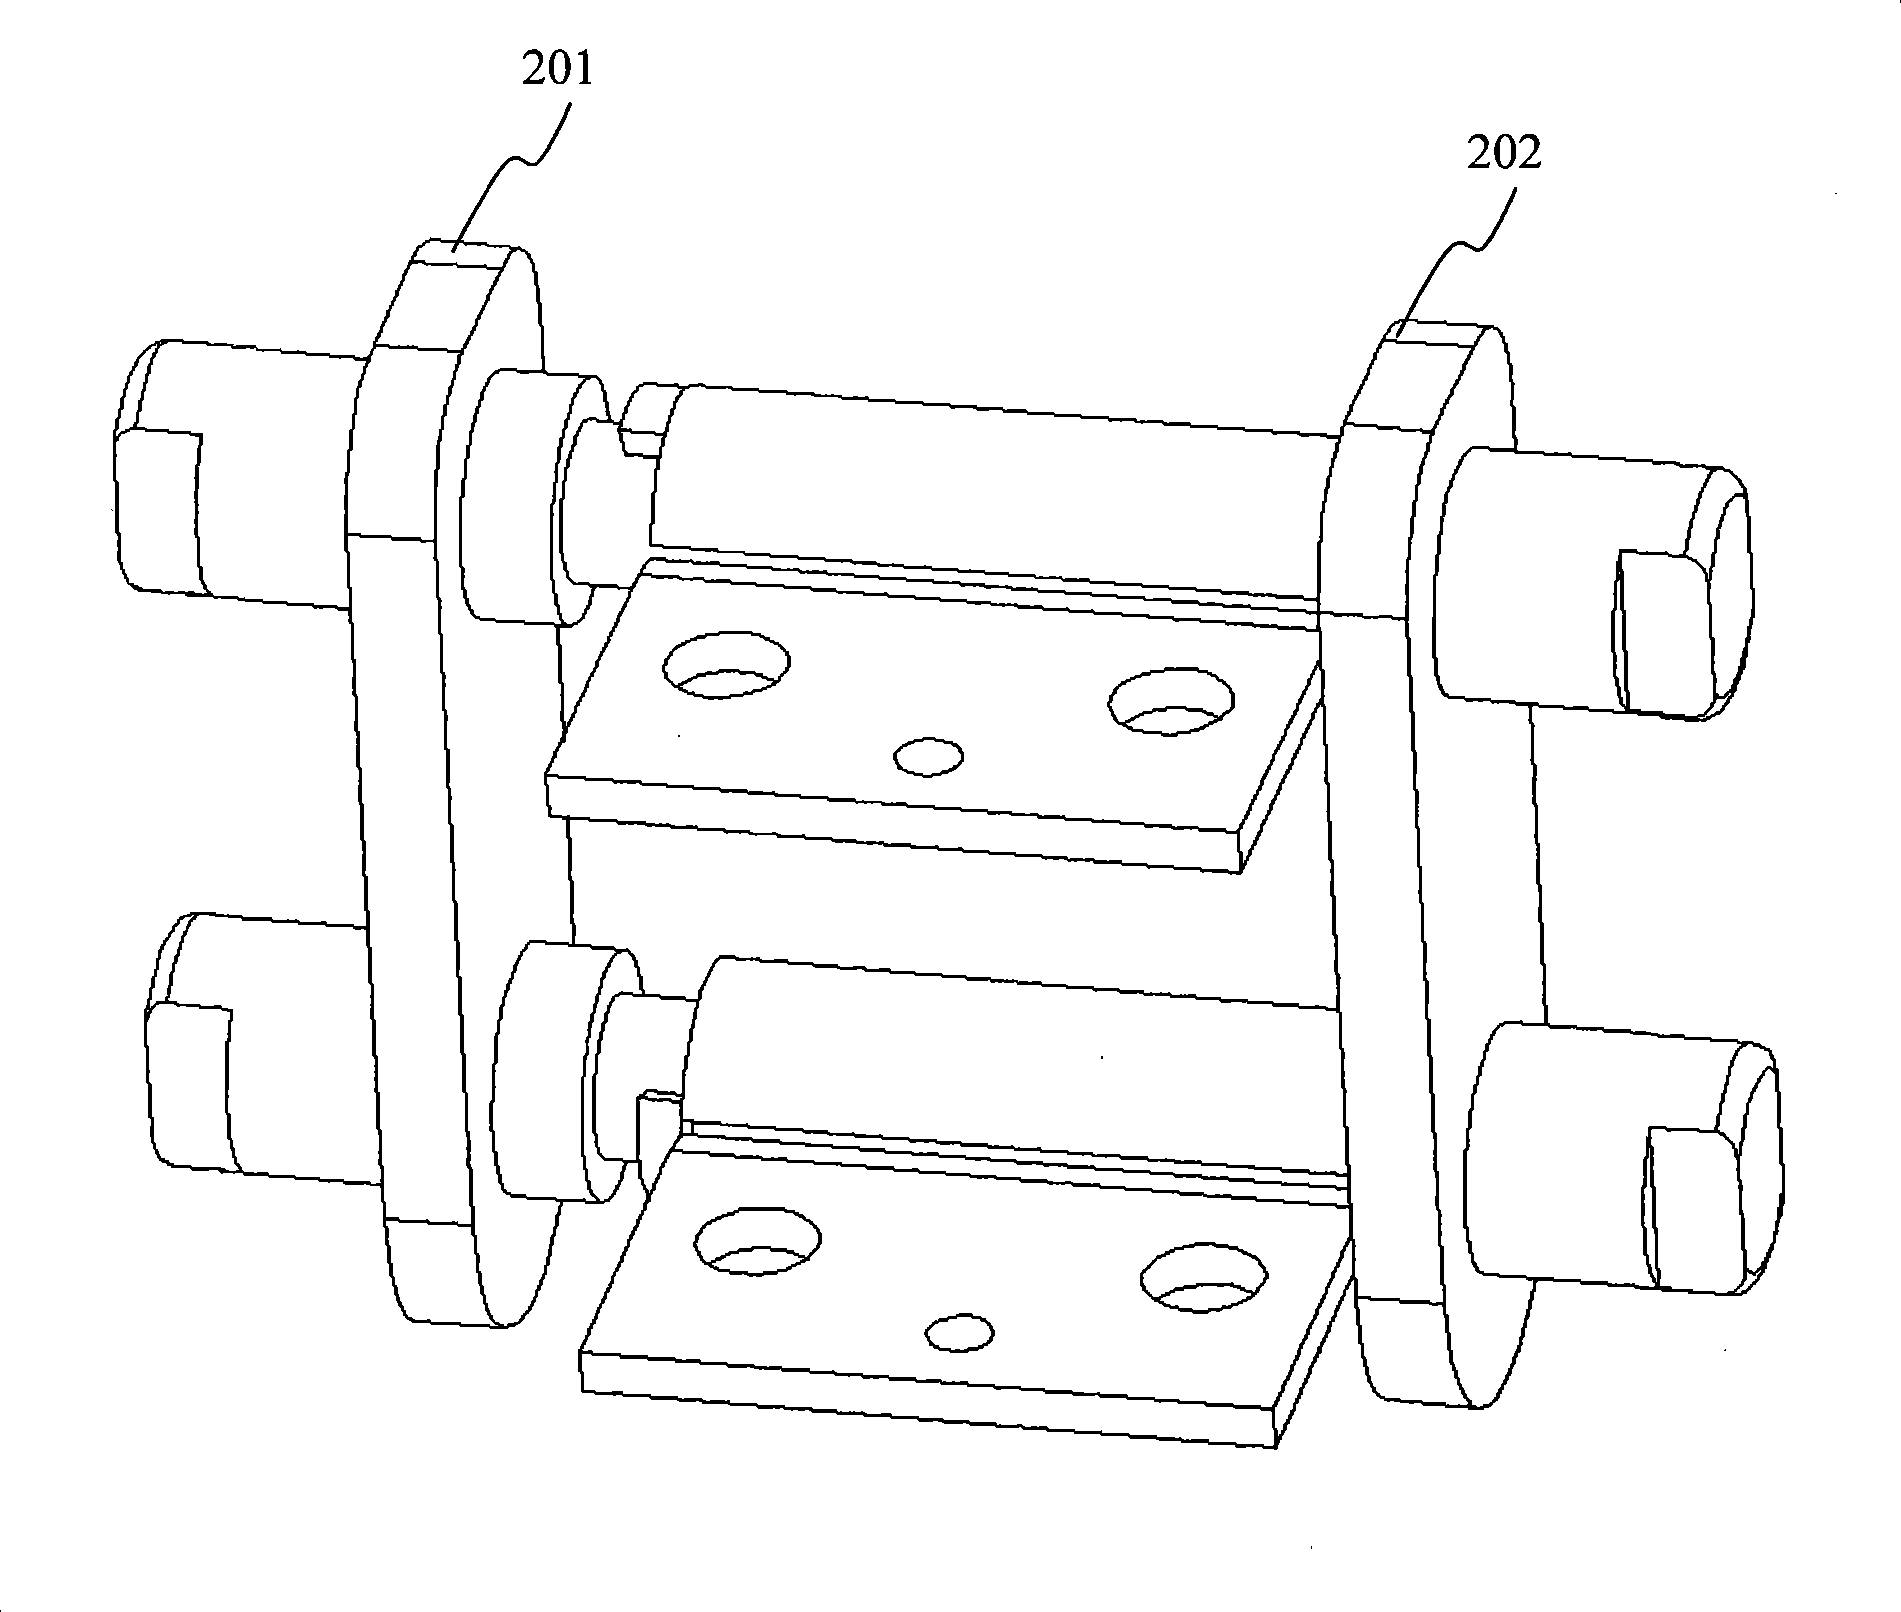 Notebook computer and rotating shaft device